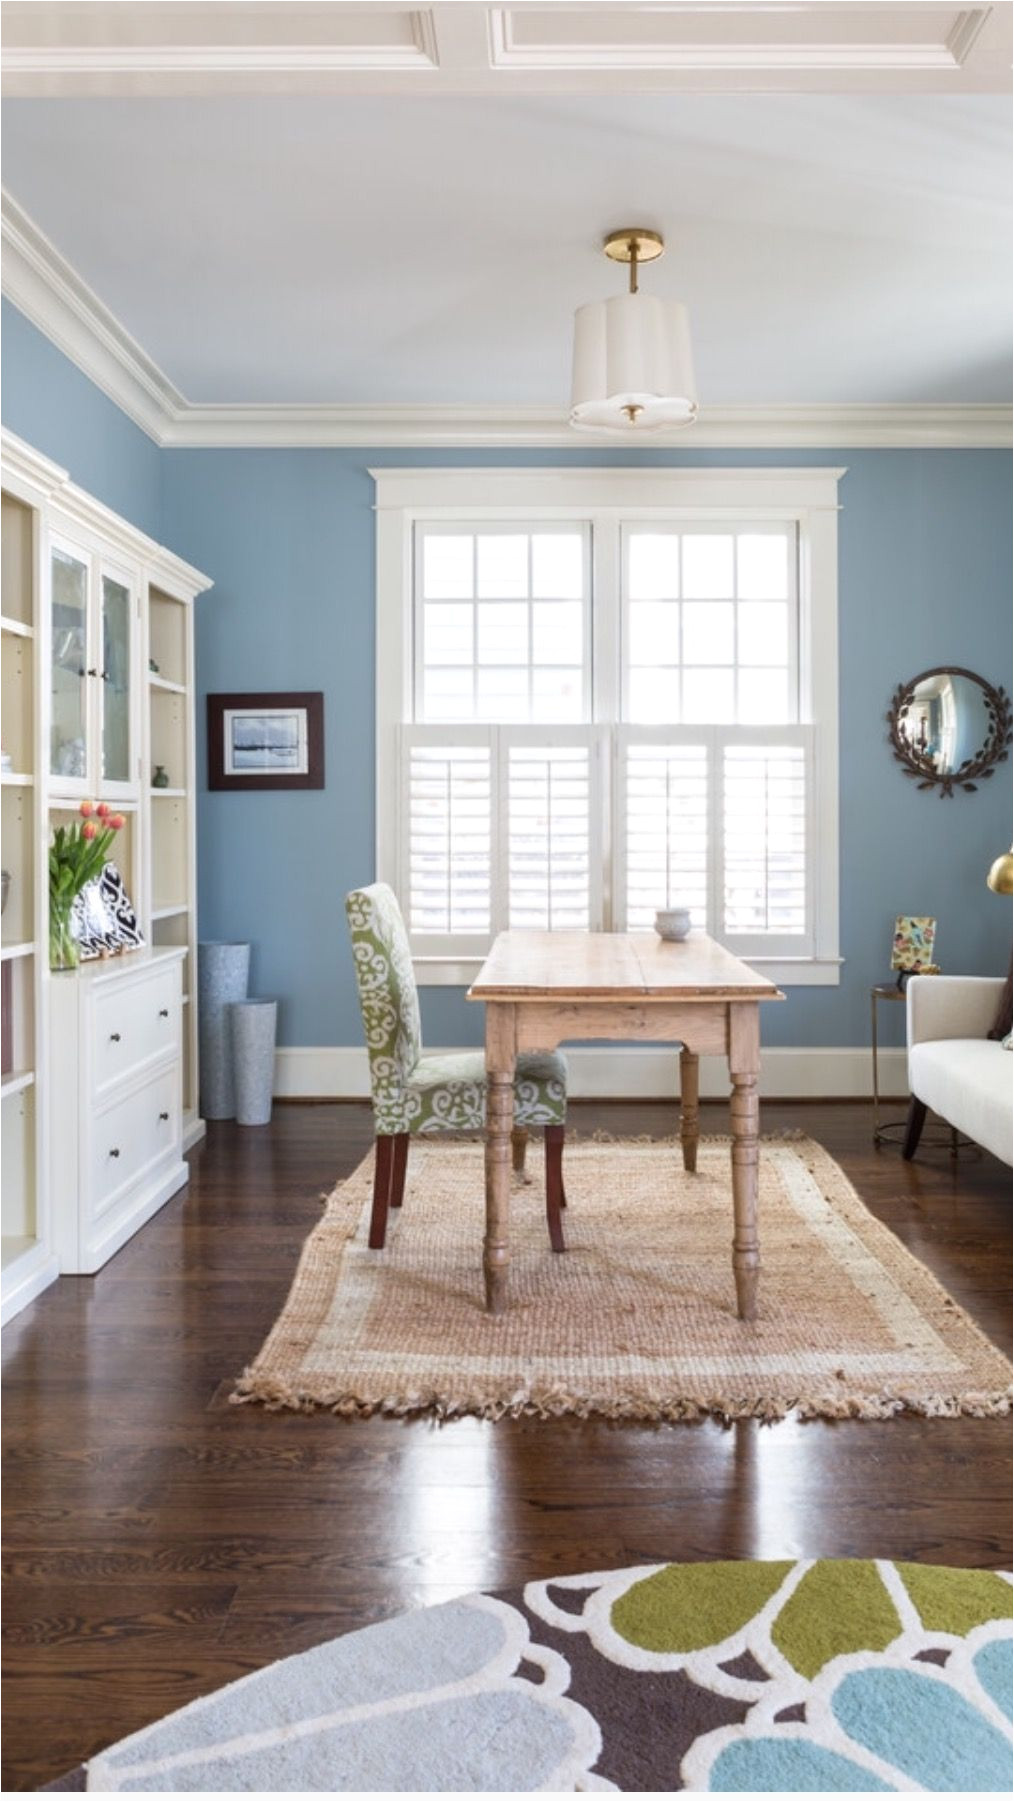 wall color santorini blue by benjamin moore room designed by liza holder homegrown decor seen on houzz